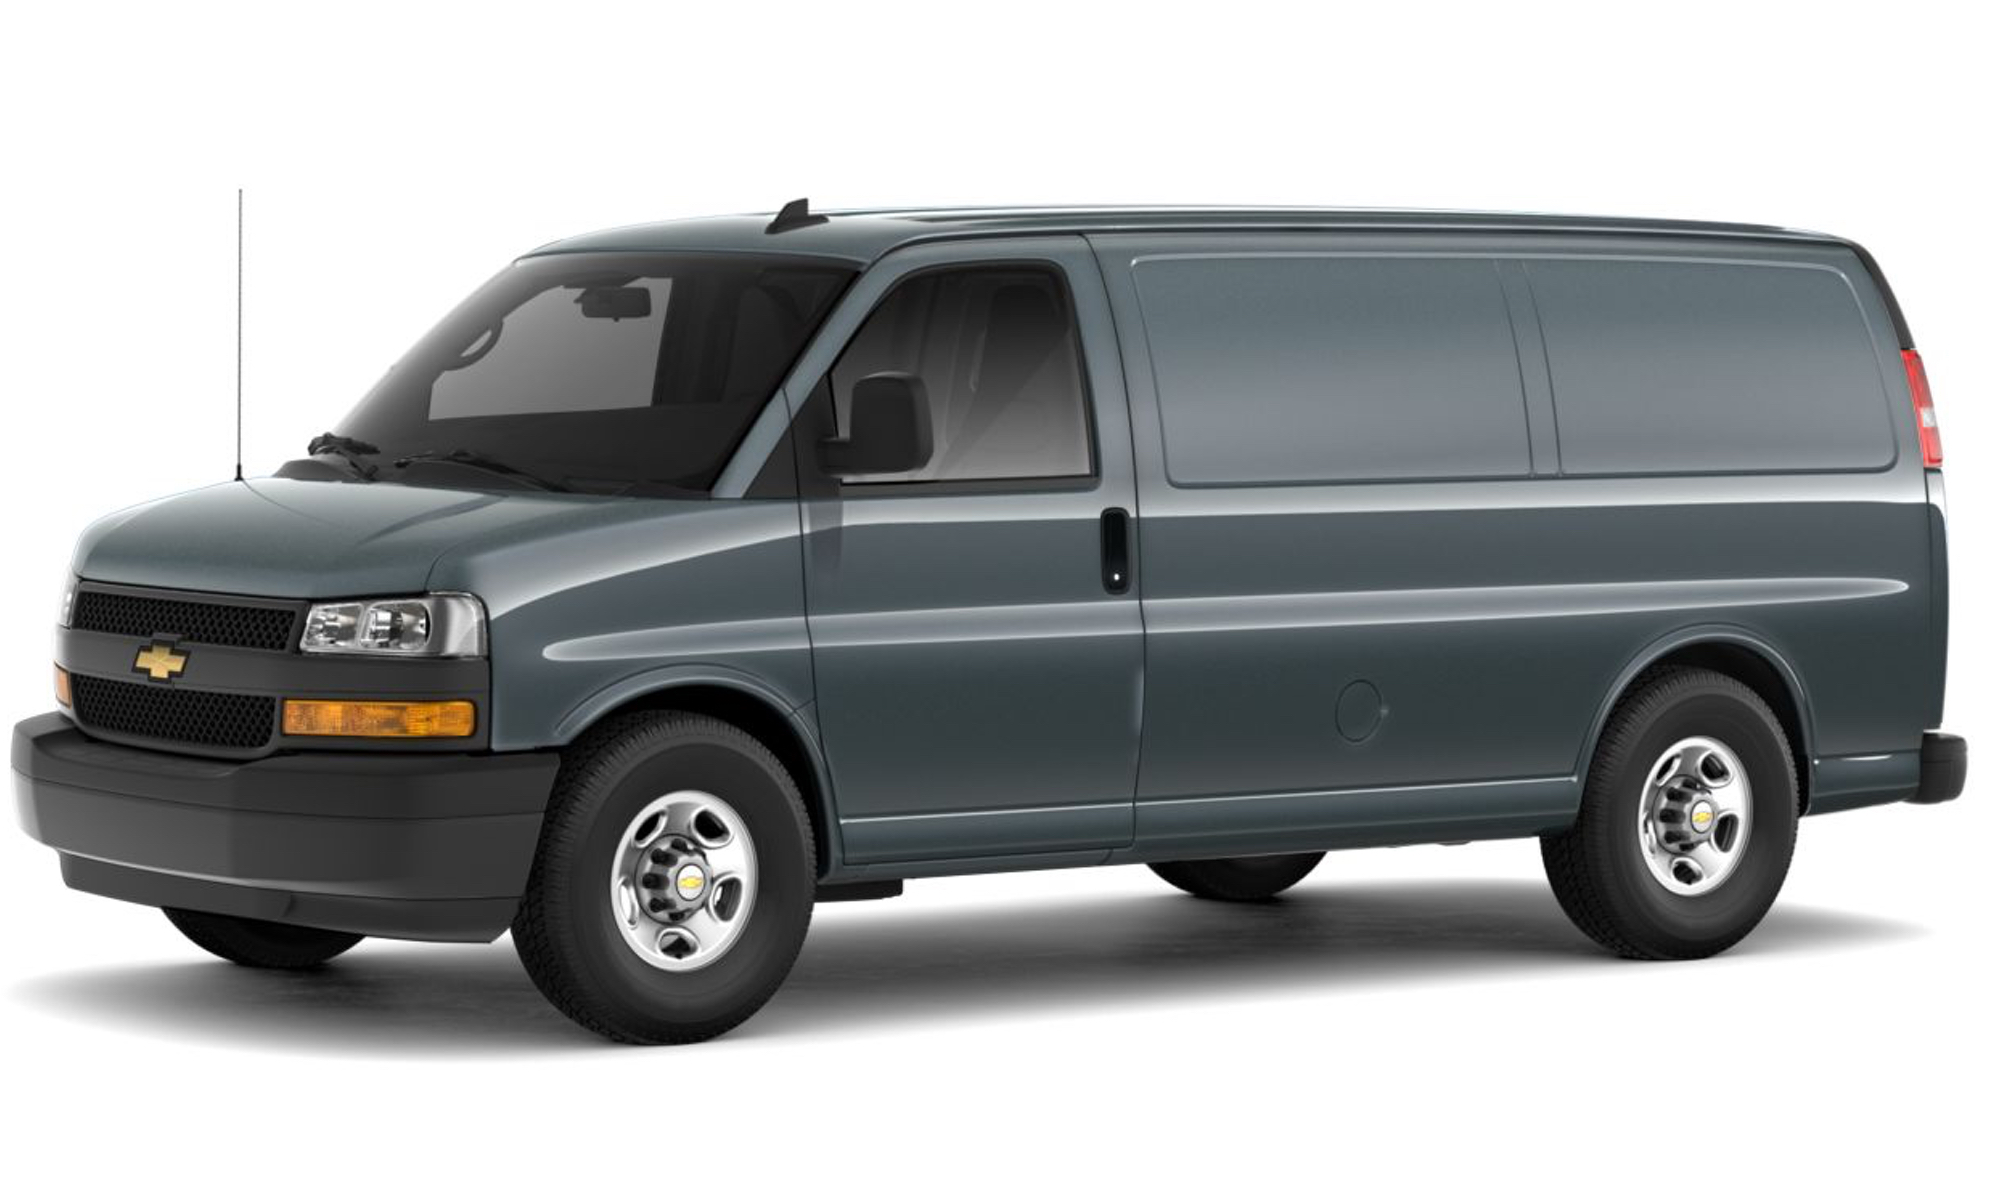 Chevy Express Gmc Savana Replacement Begins To Take Shape